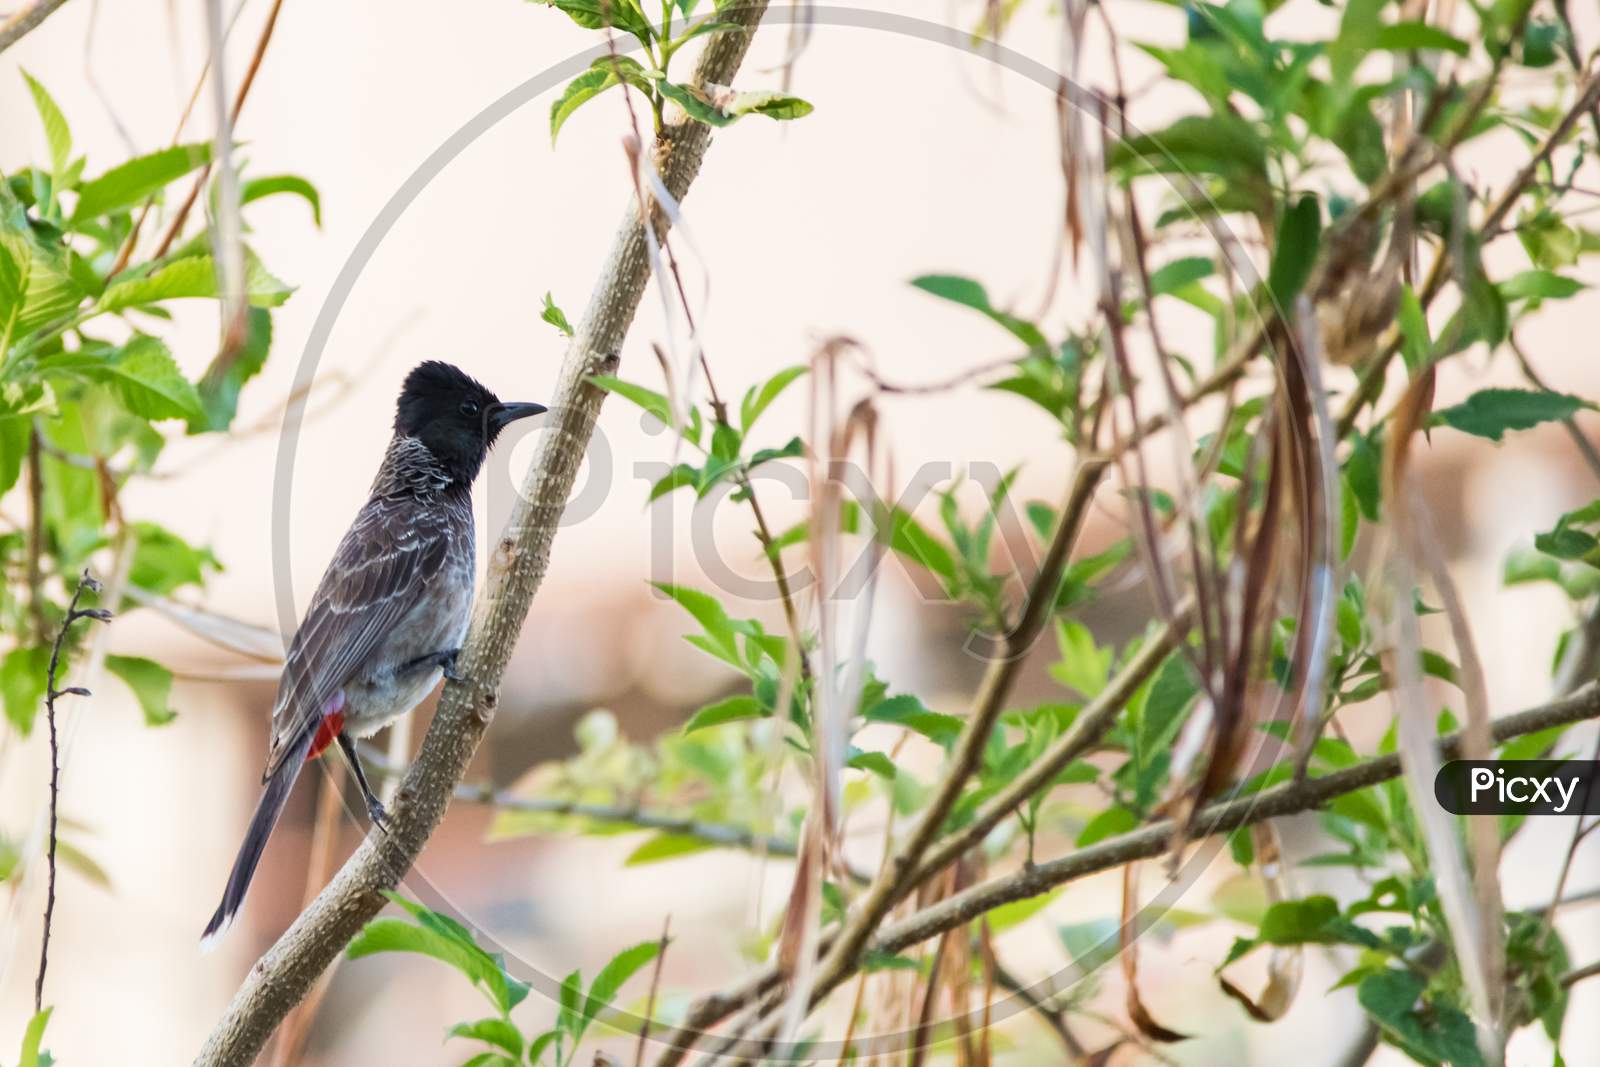 Red Vented Bulbul (Pycnonotus Cafer) Climbing Up A Twig